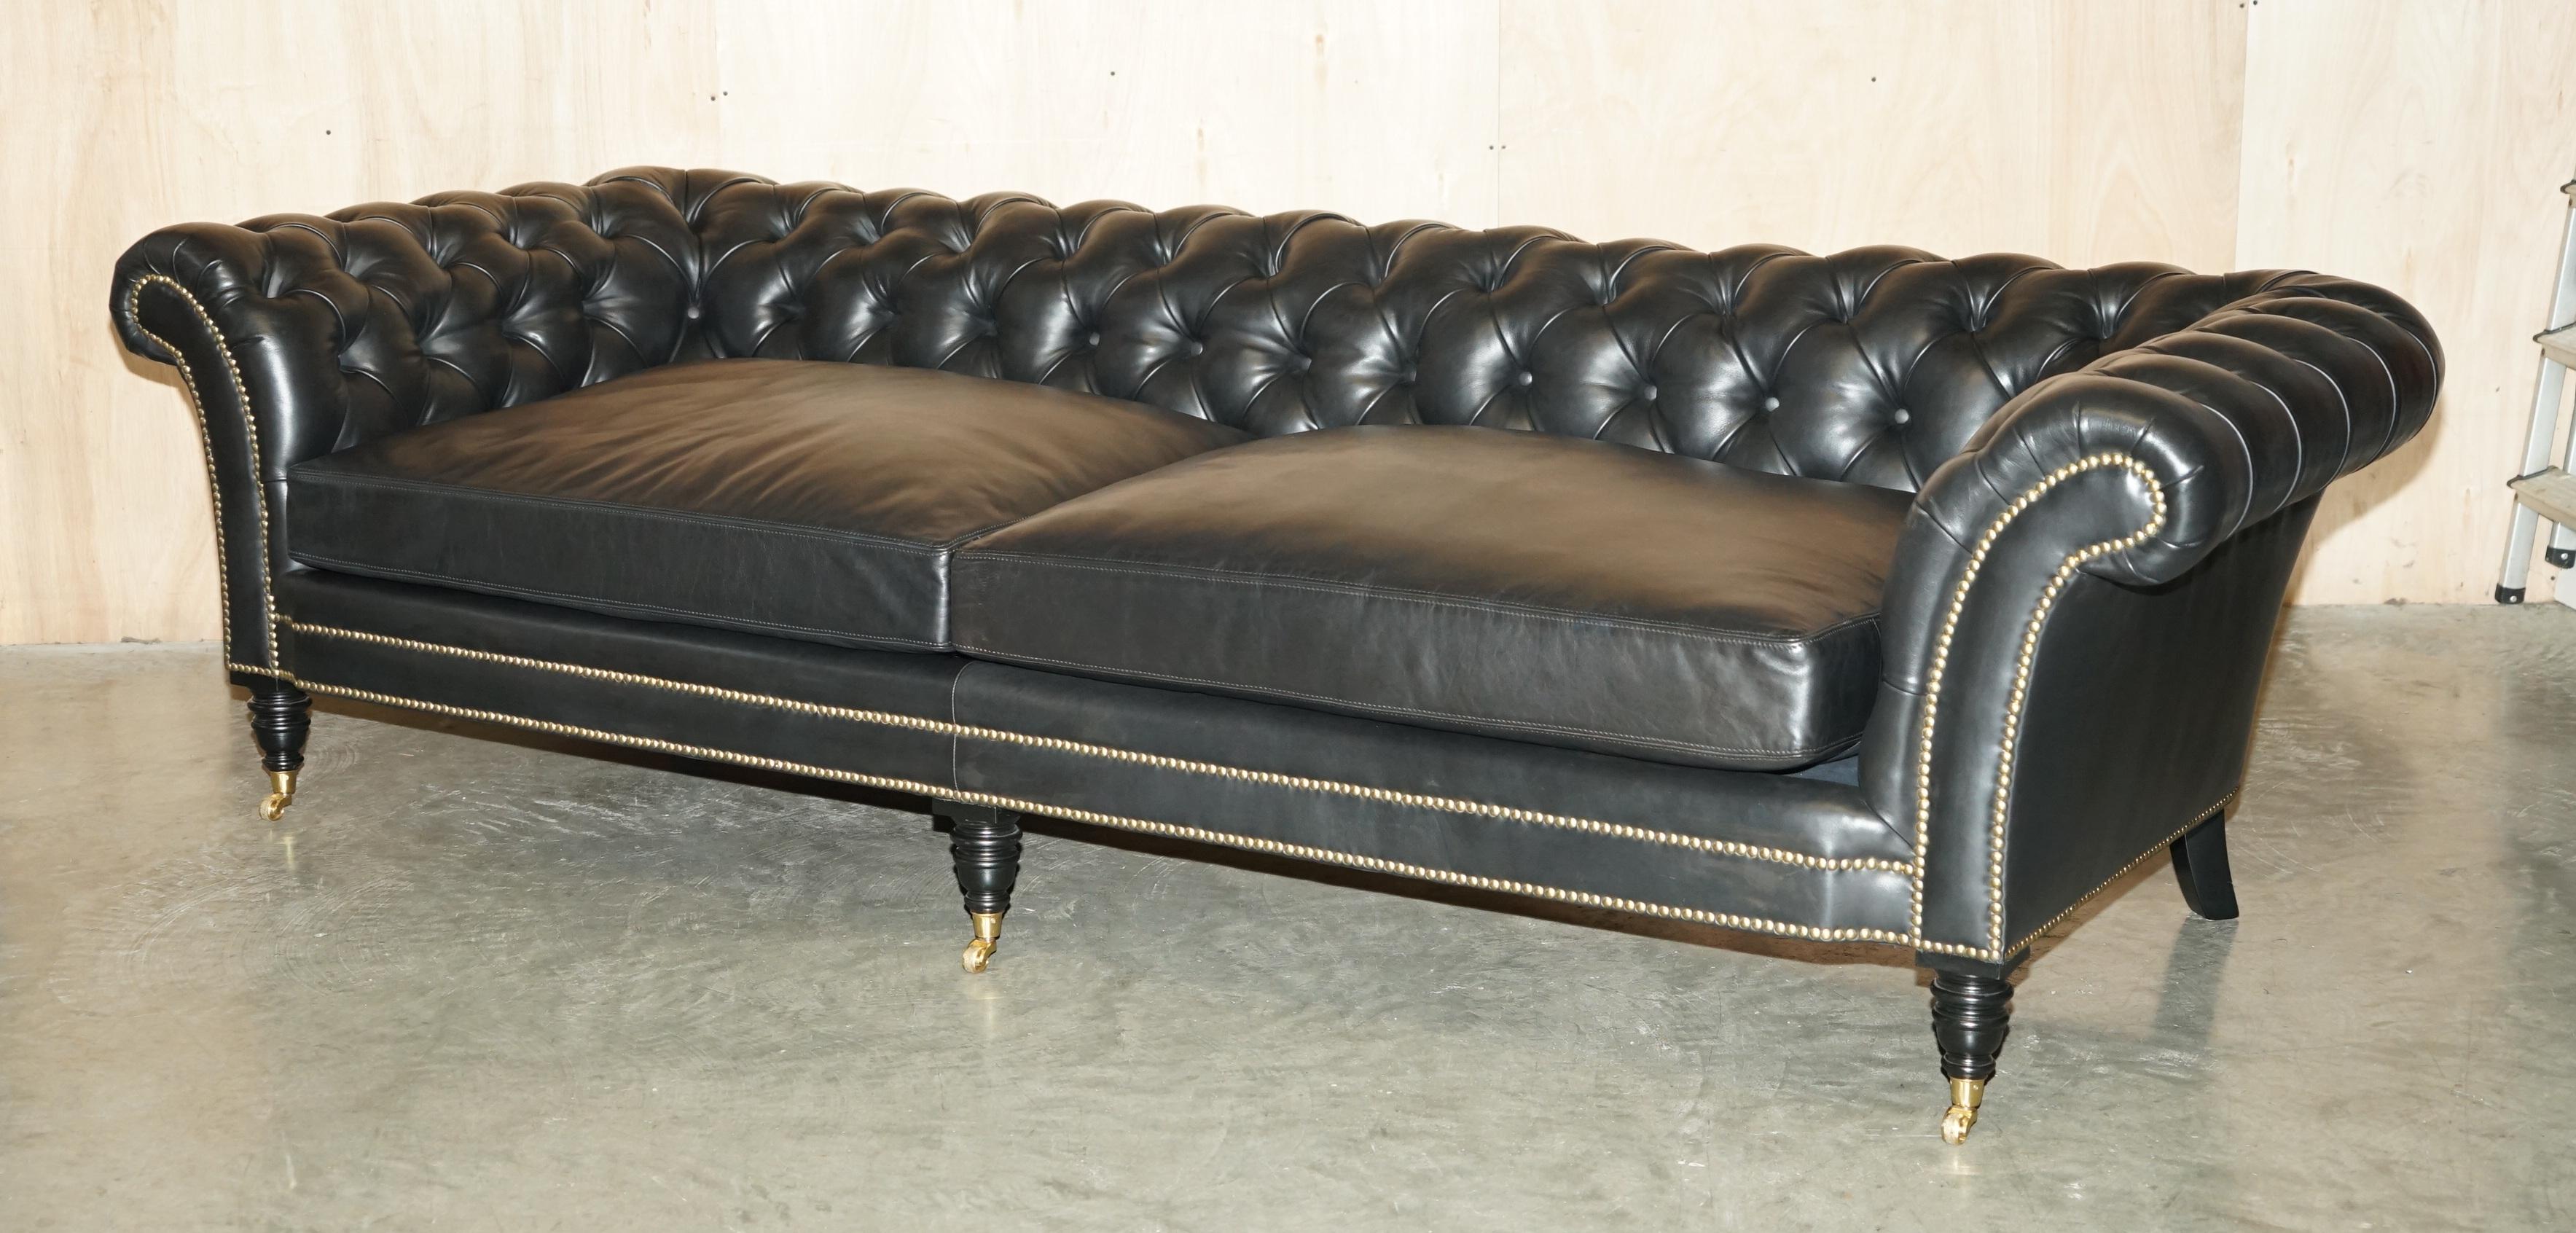 EXQUISITE PAIR OF RALPH LAUREN BROOK STREET BLACK LEATHER CHESTERFIELD SOFAs For Sale 7